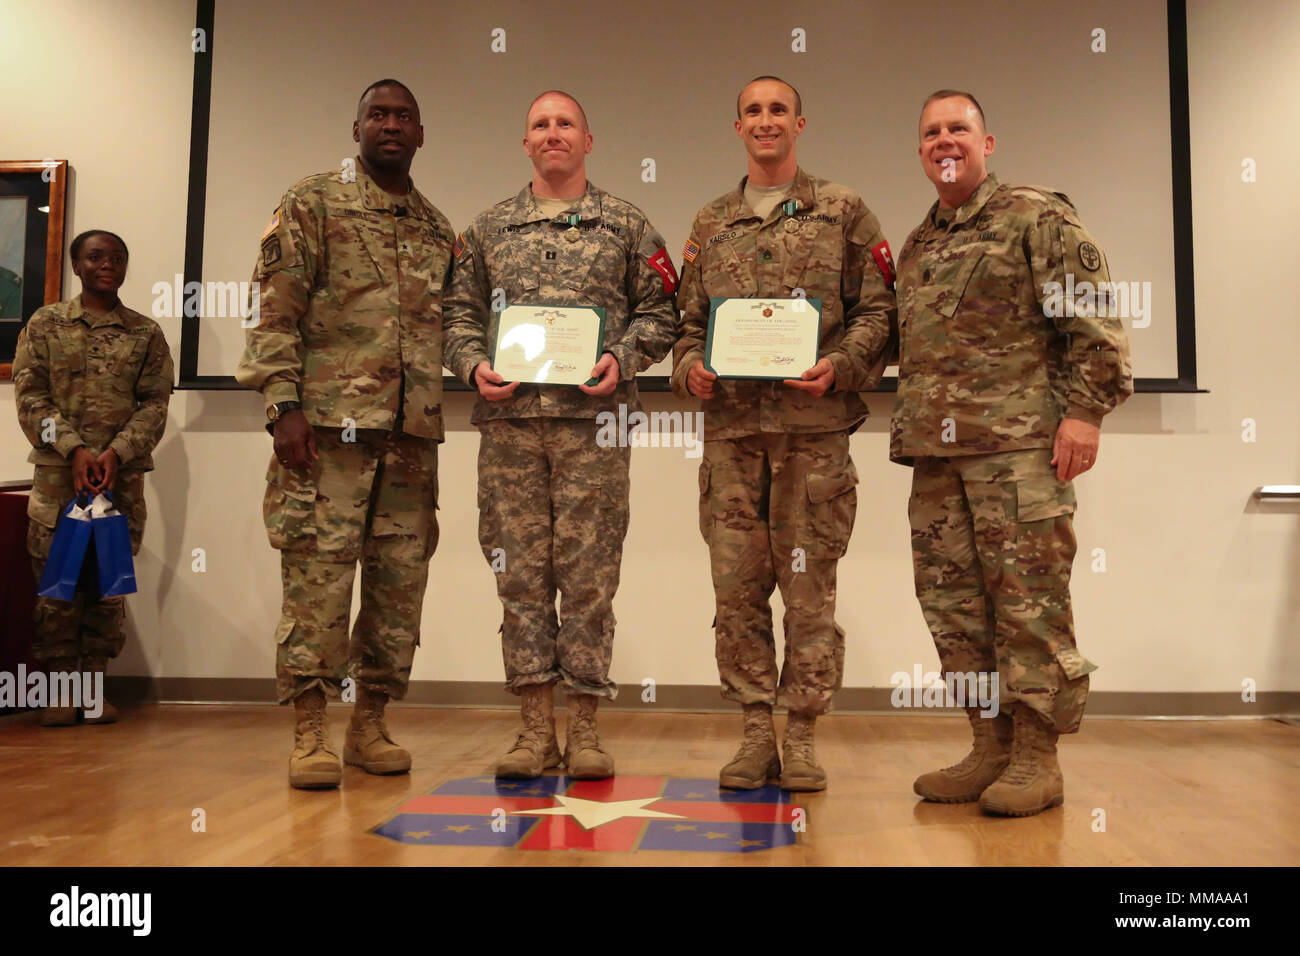 U.S. Army Capt. Jeremy Lewis and Staff Sgt. Joseph Karslo, assigned Public Health Command - Atlantic, take a photo with Brig. Gen. R. Scott Dingle and Command Sgt. Maj. Matthew Brady during the 2017 Best Medic Competition Award Ceremony at Fort Bragg, N.C., Sept. 20, 2017. The competition tested the physical and mental toughness, as well as the technical competence, of each medic to identify the team moving forward to represent the region at the next level of the competition.  (U.S. Army photo by Pfc. Meleesa Gutierrez) Stock Photo